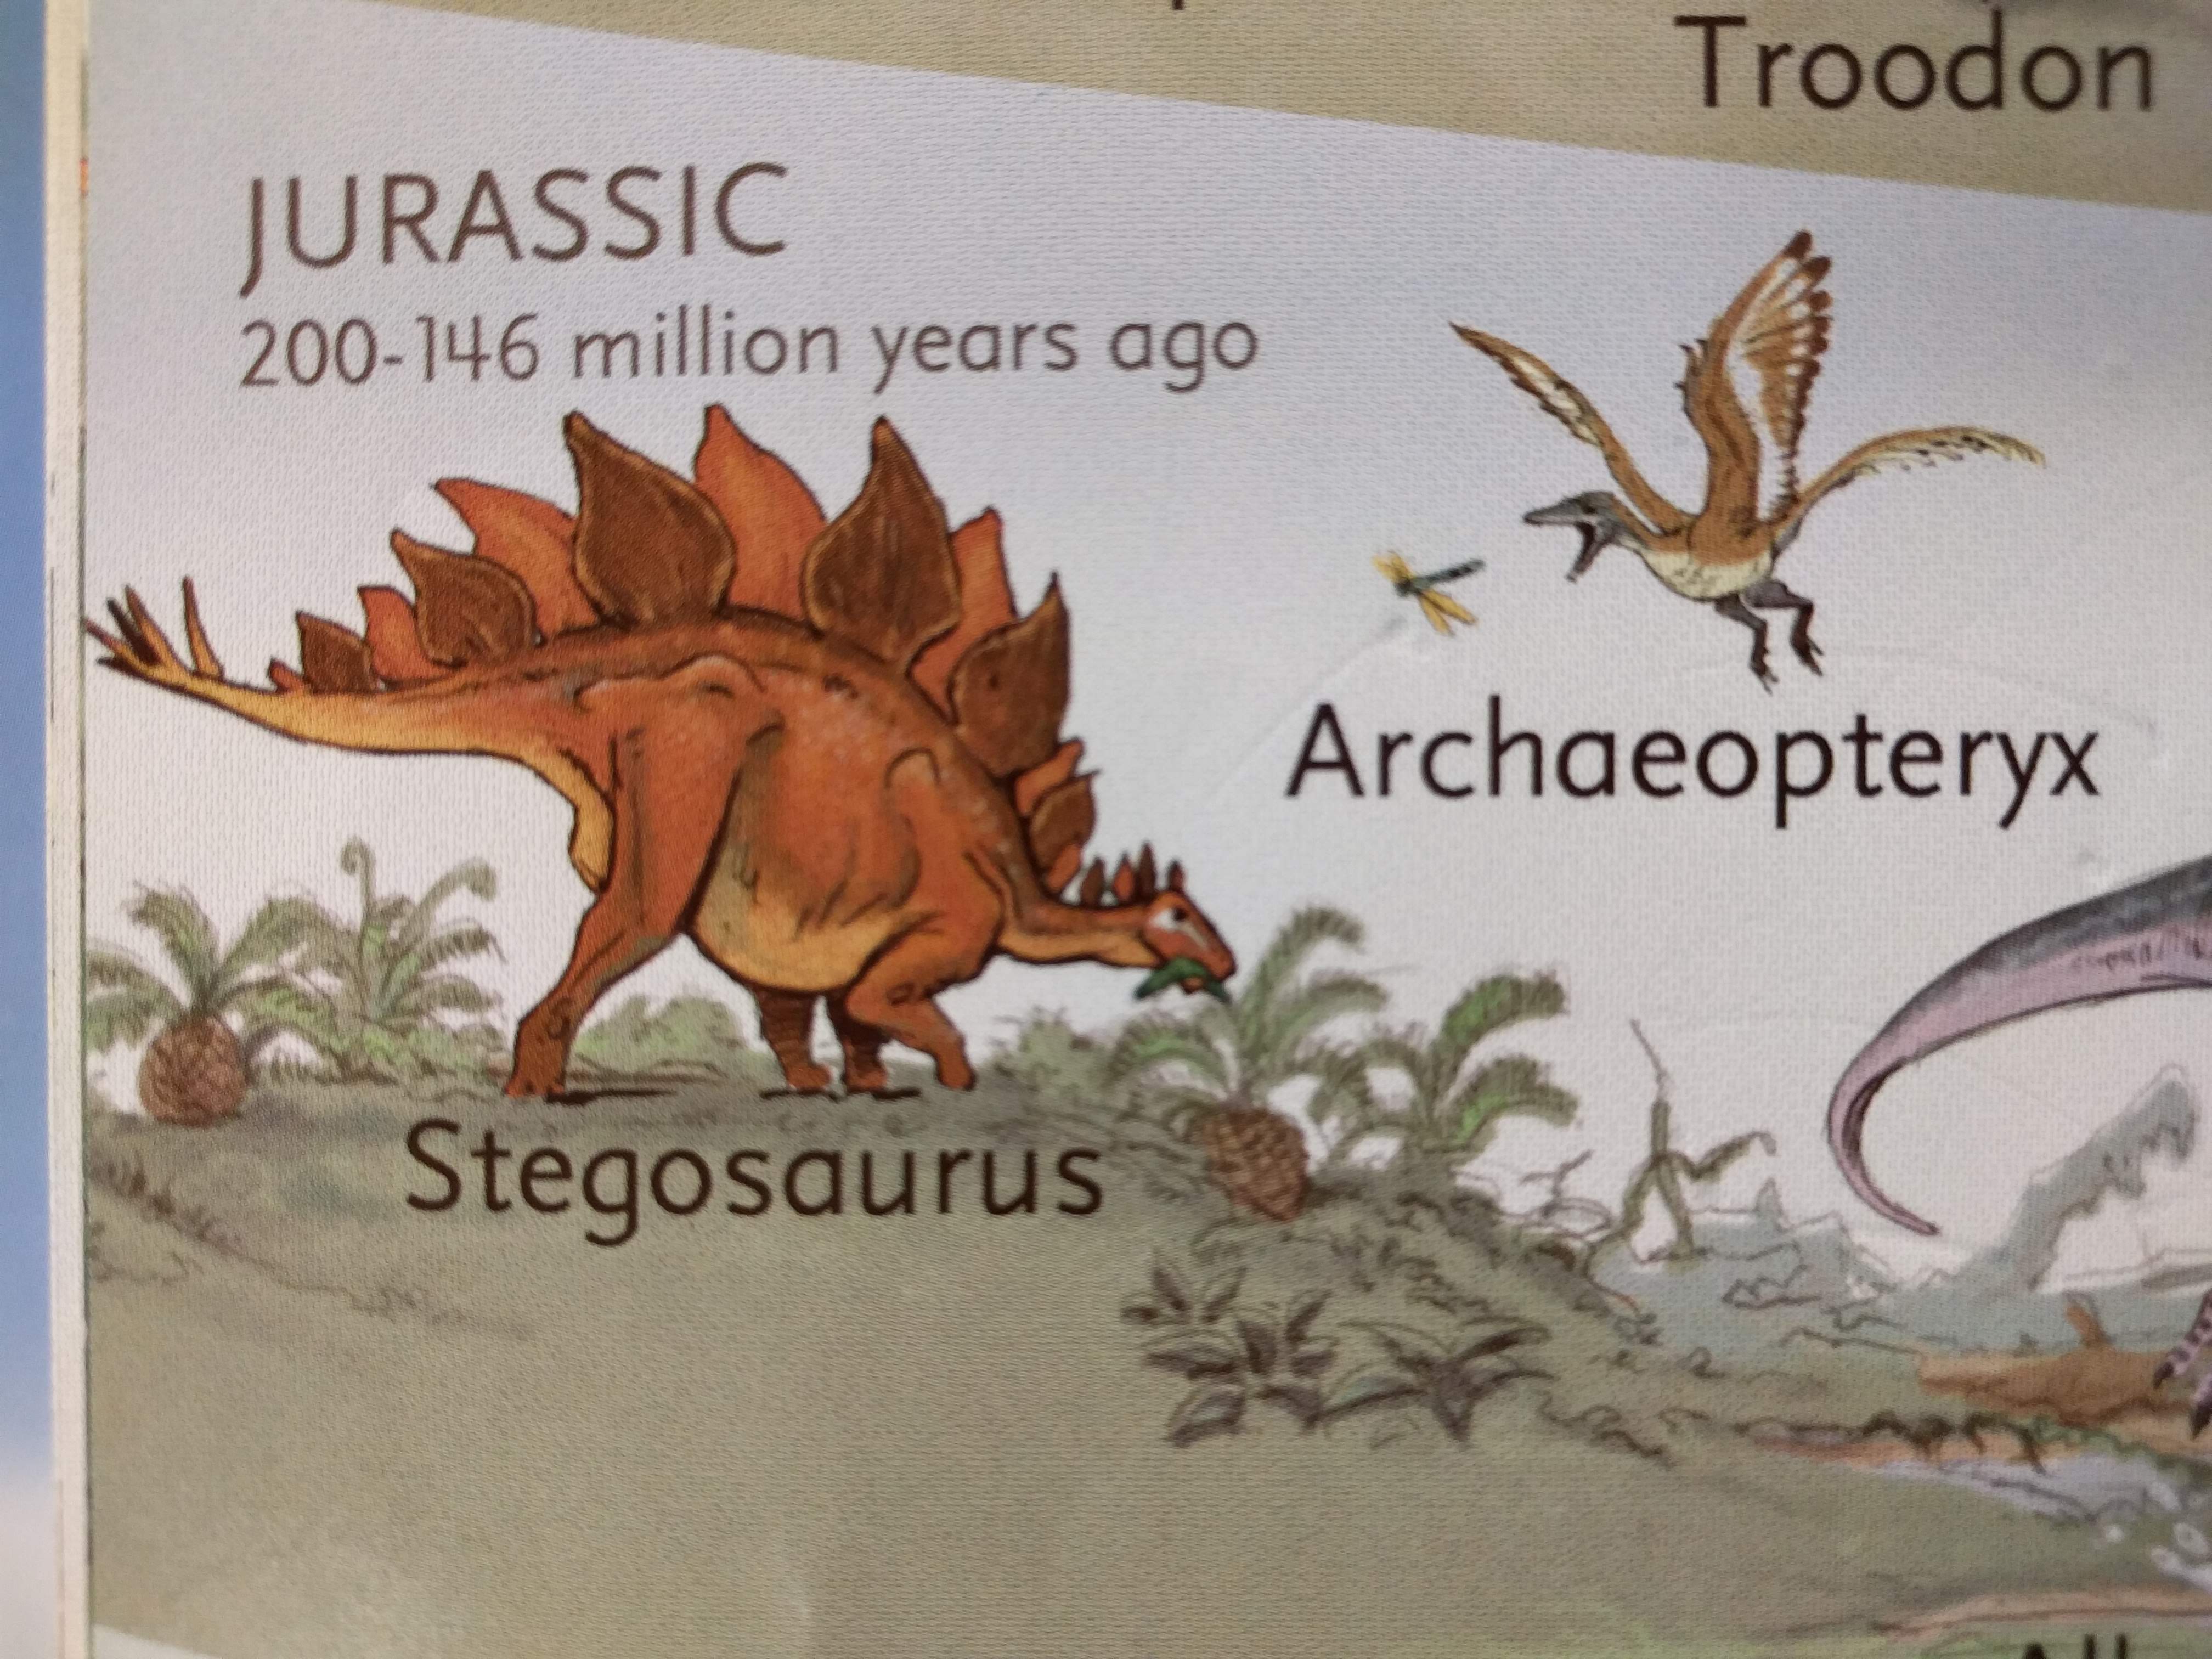 Detail view of a page depicting Stegosaurus and Archaeopteryx